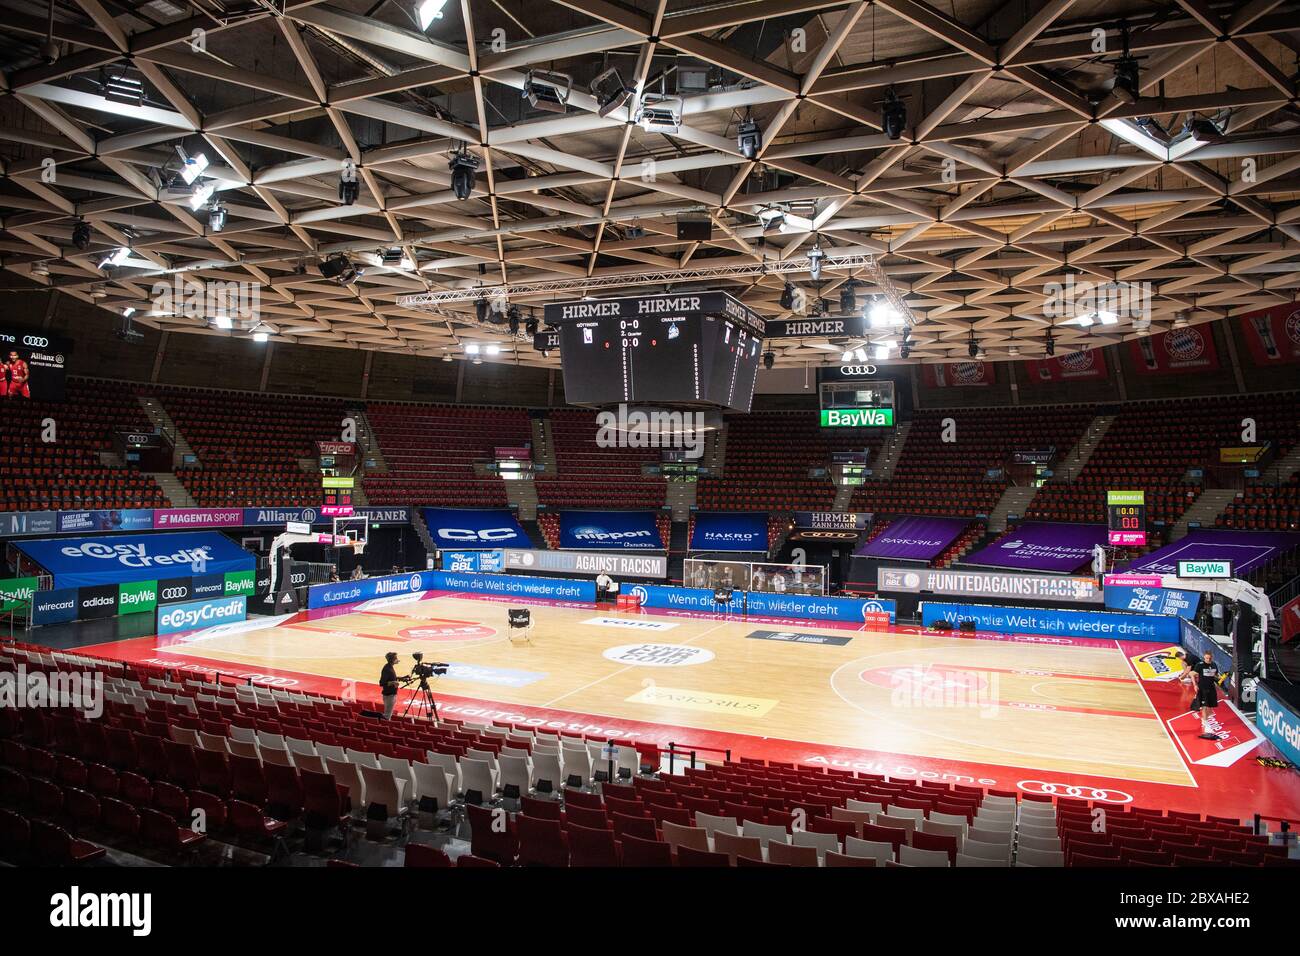 Munich, Germany. 06th June, 2020. Basketball: Bundesliga Final Tournament,  BG Göttingen - Hakro Merlins Crailsheim, preliminary round, Group A, 1st  matchday at the Audi Dome. The empty grandstand can be seen before